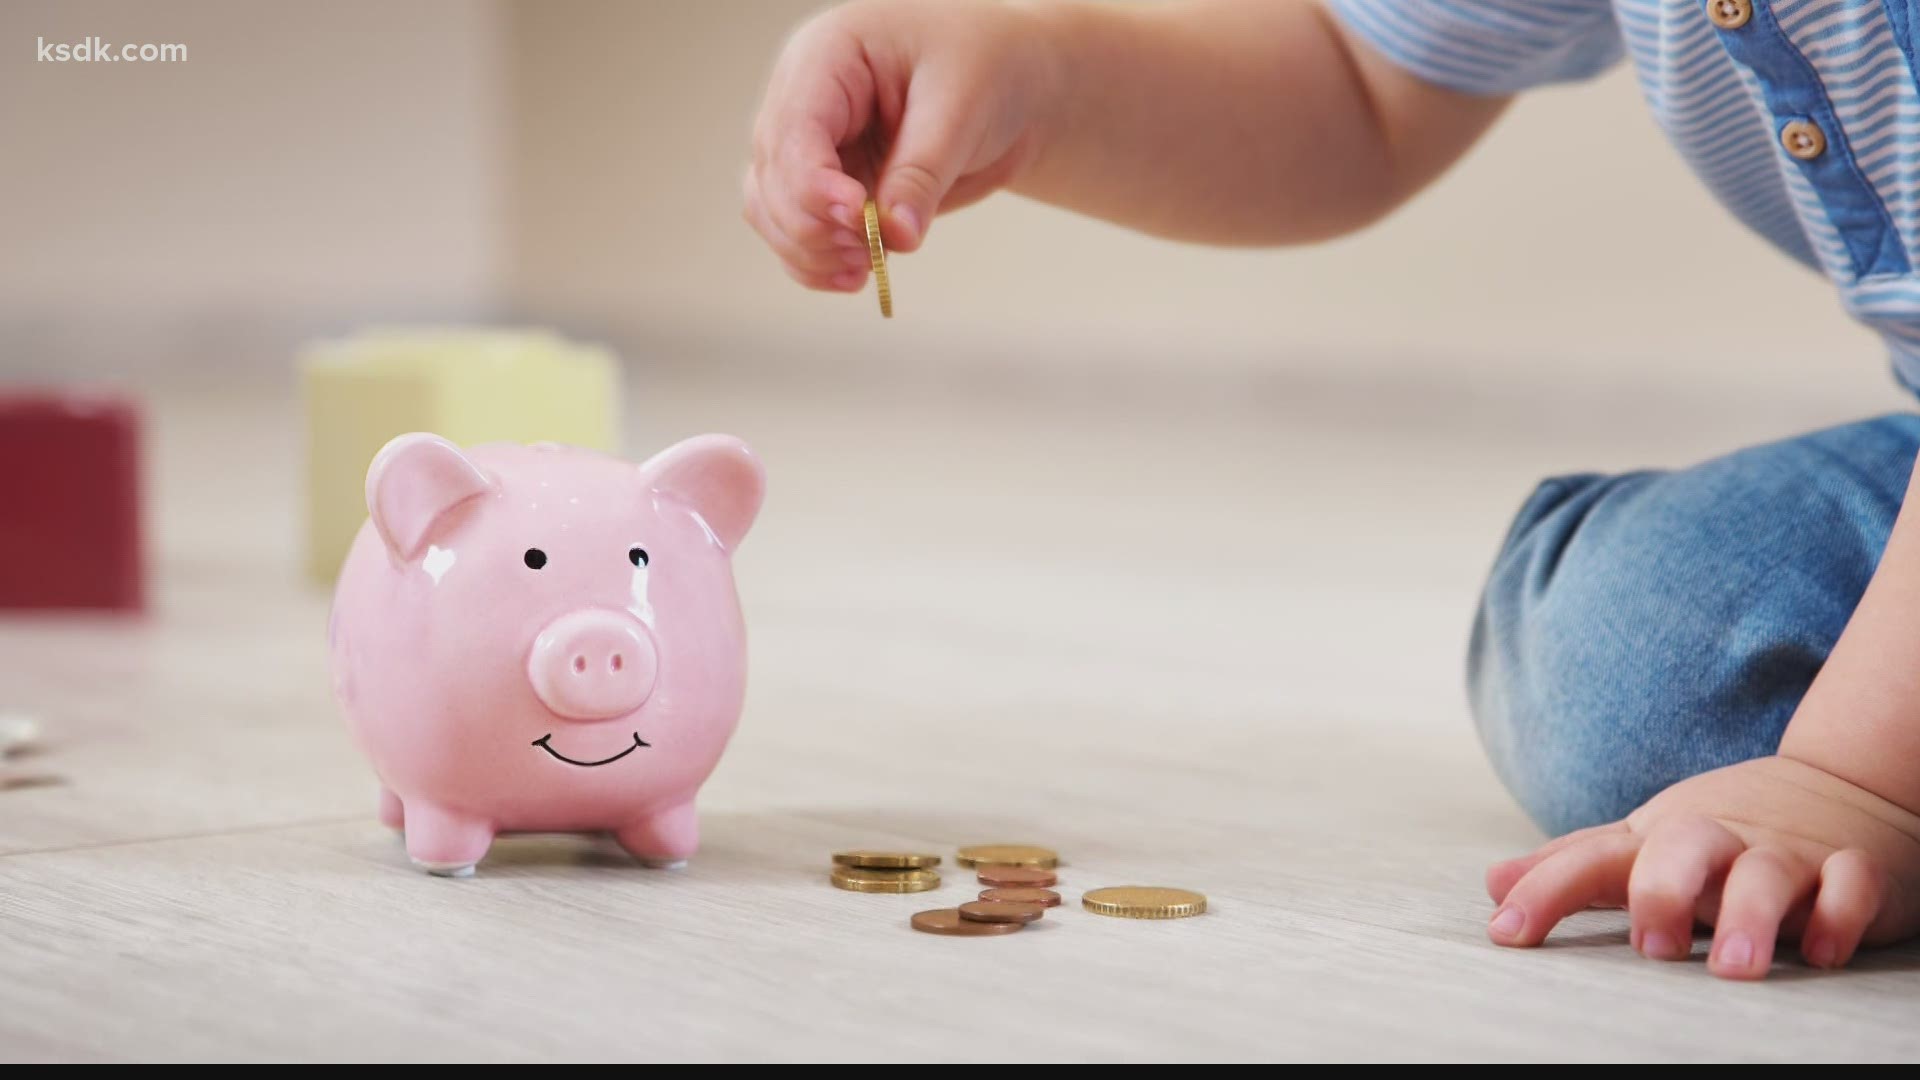 Monday is National Savings Day. We have tips from the experts to save successfully.